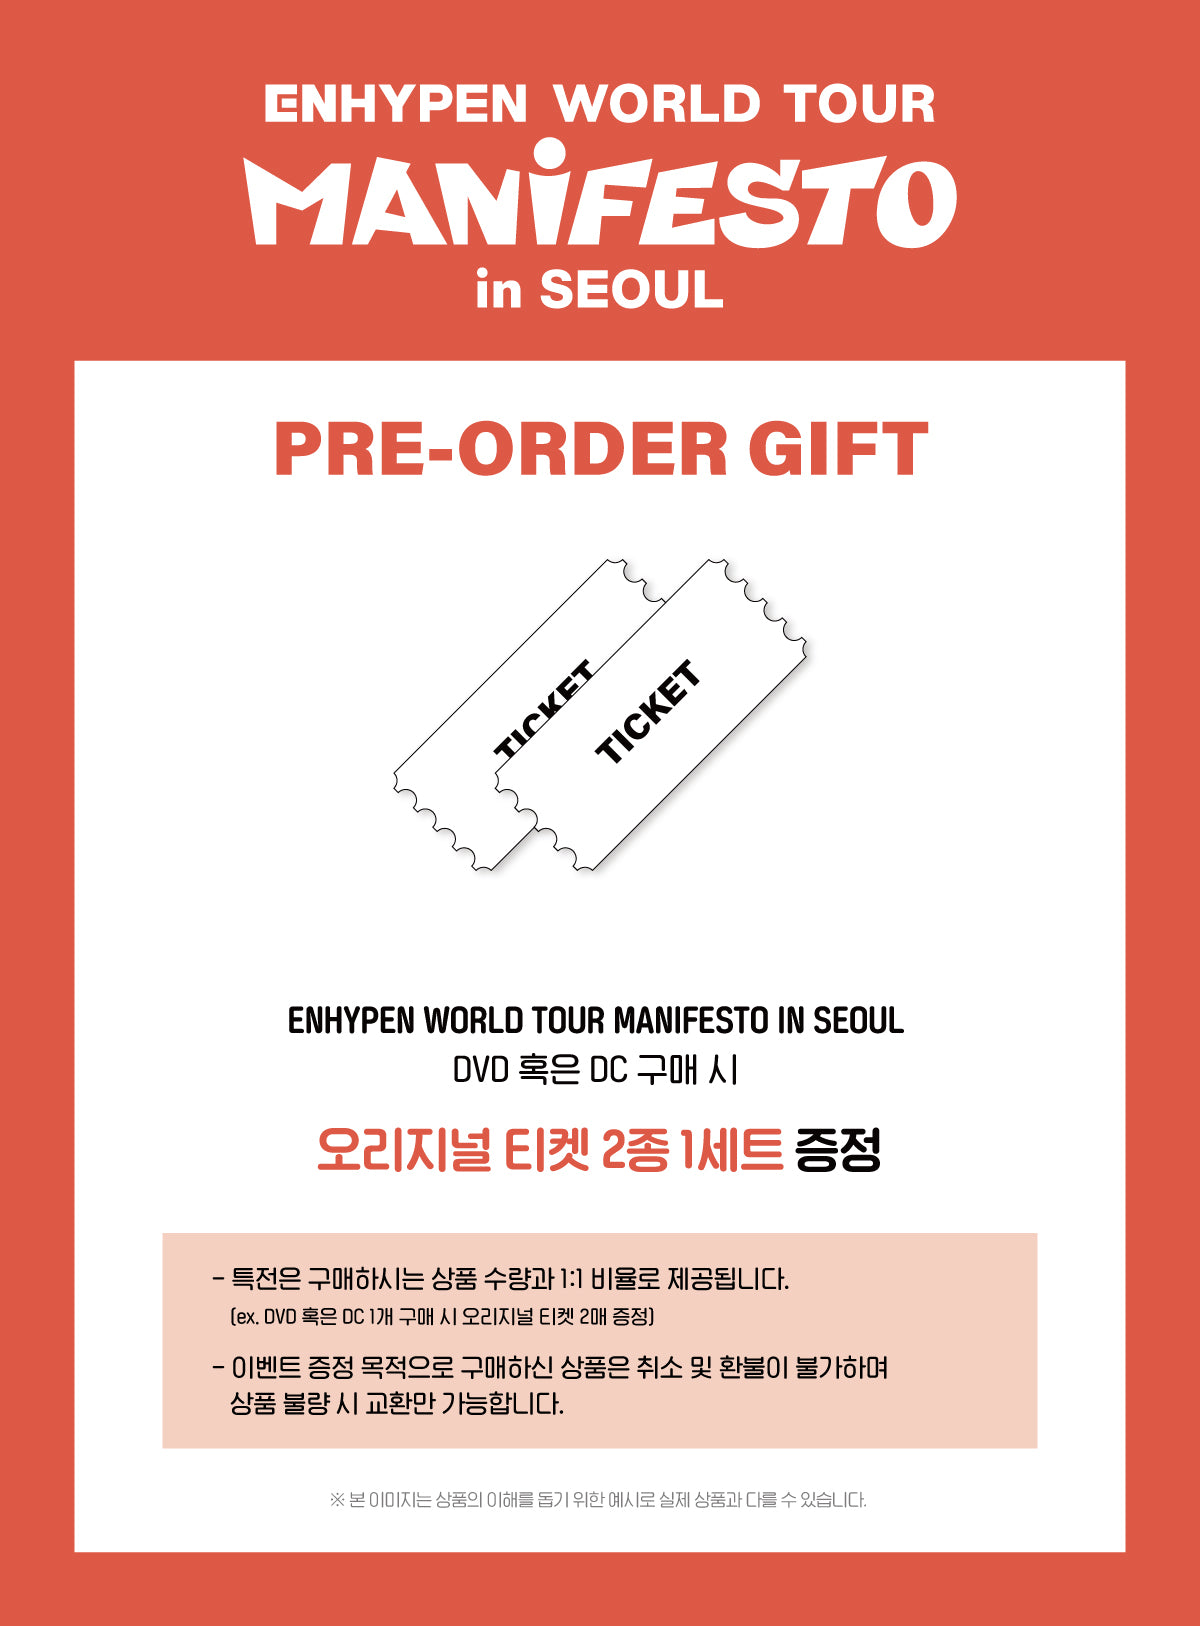 ENHYPEN WORLD TOUR MANIFESTO in SEOUL Digital Code Inclusions Pre-order Gift Ticket